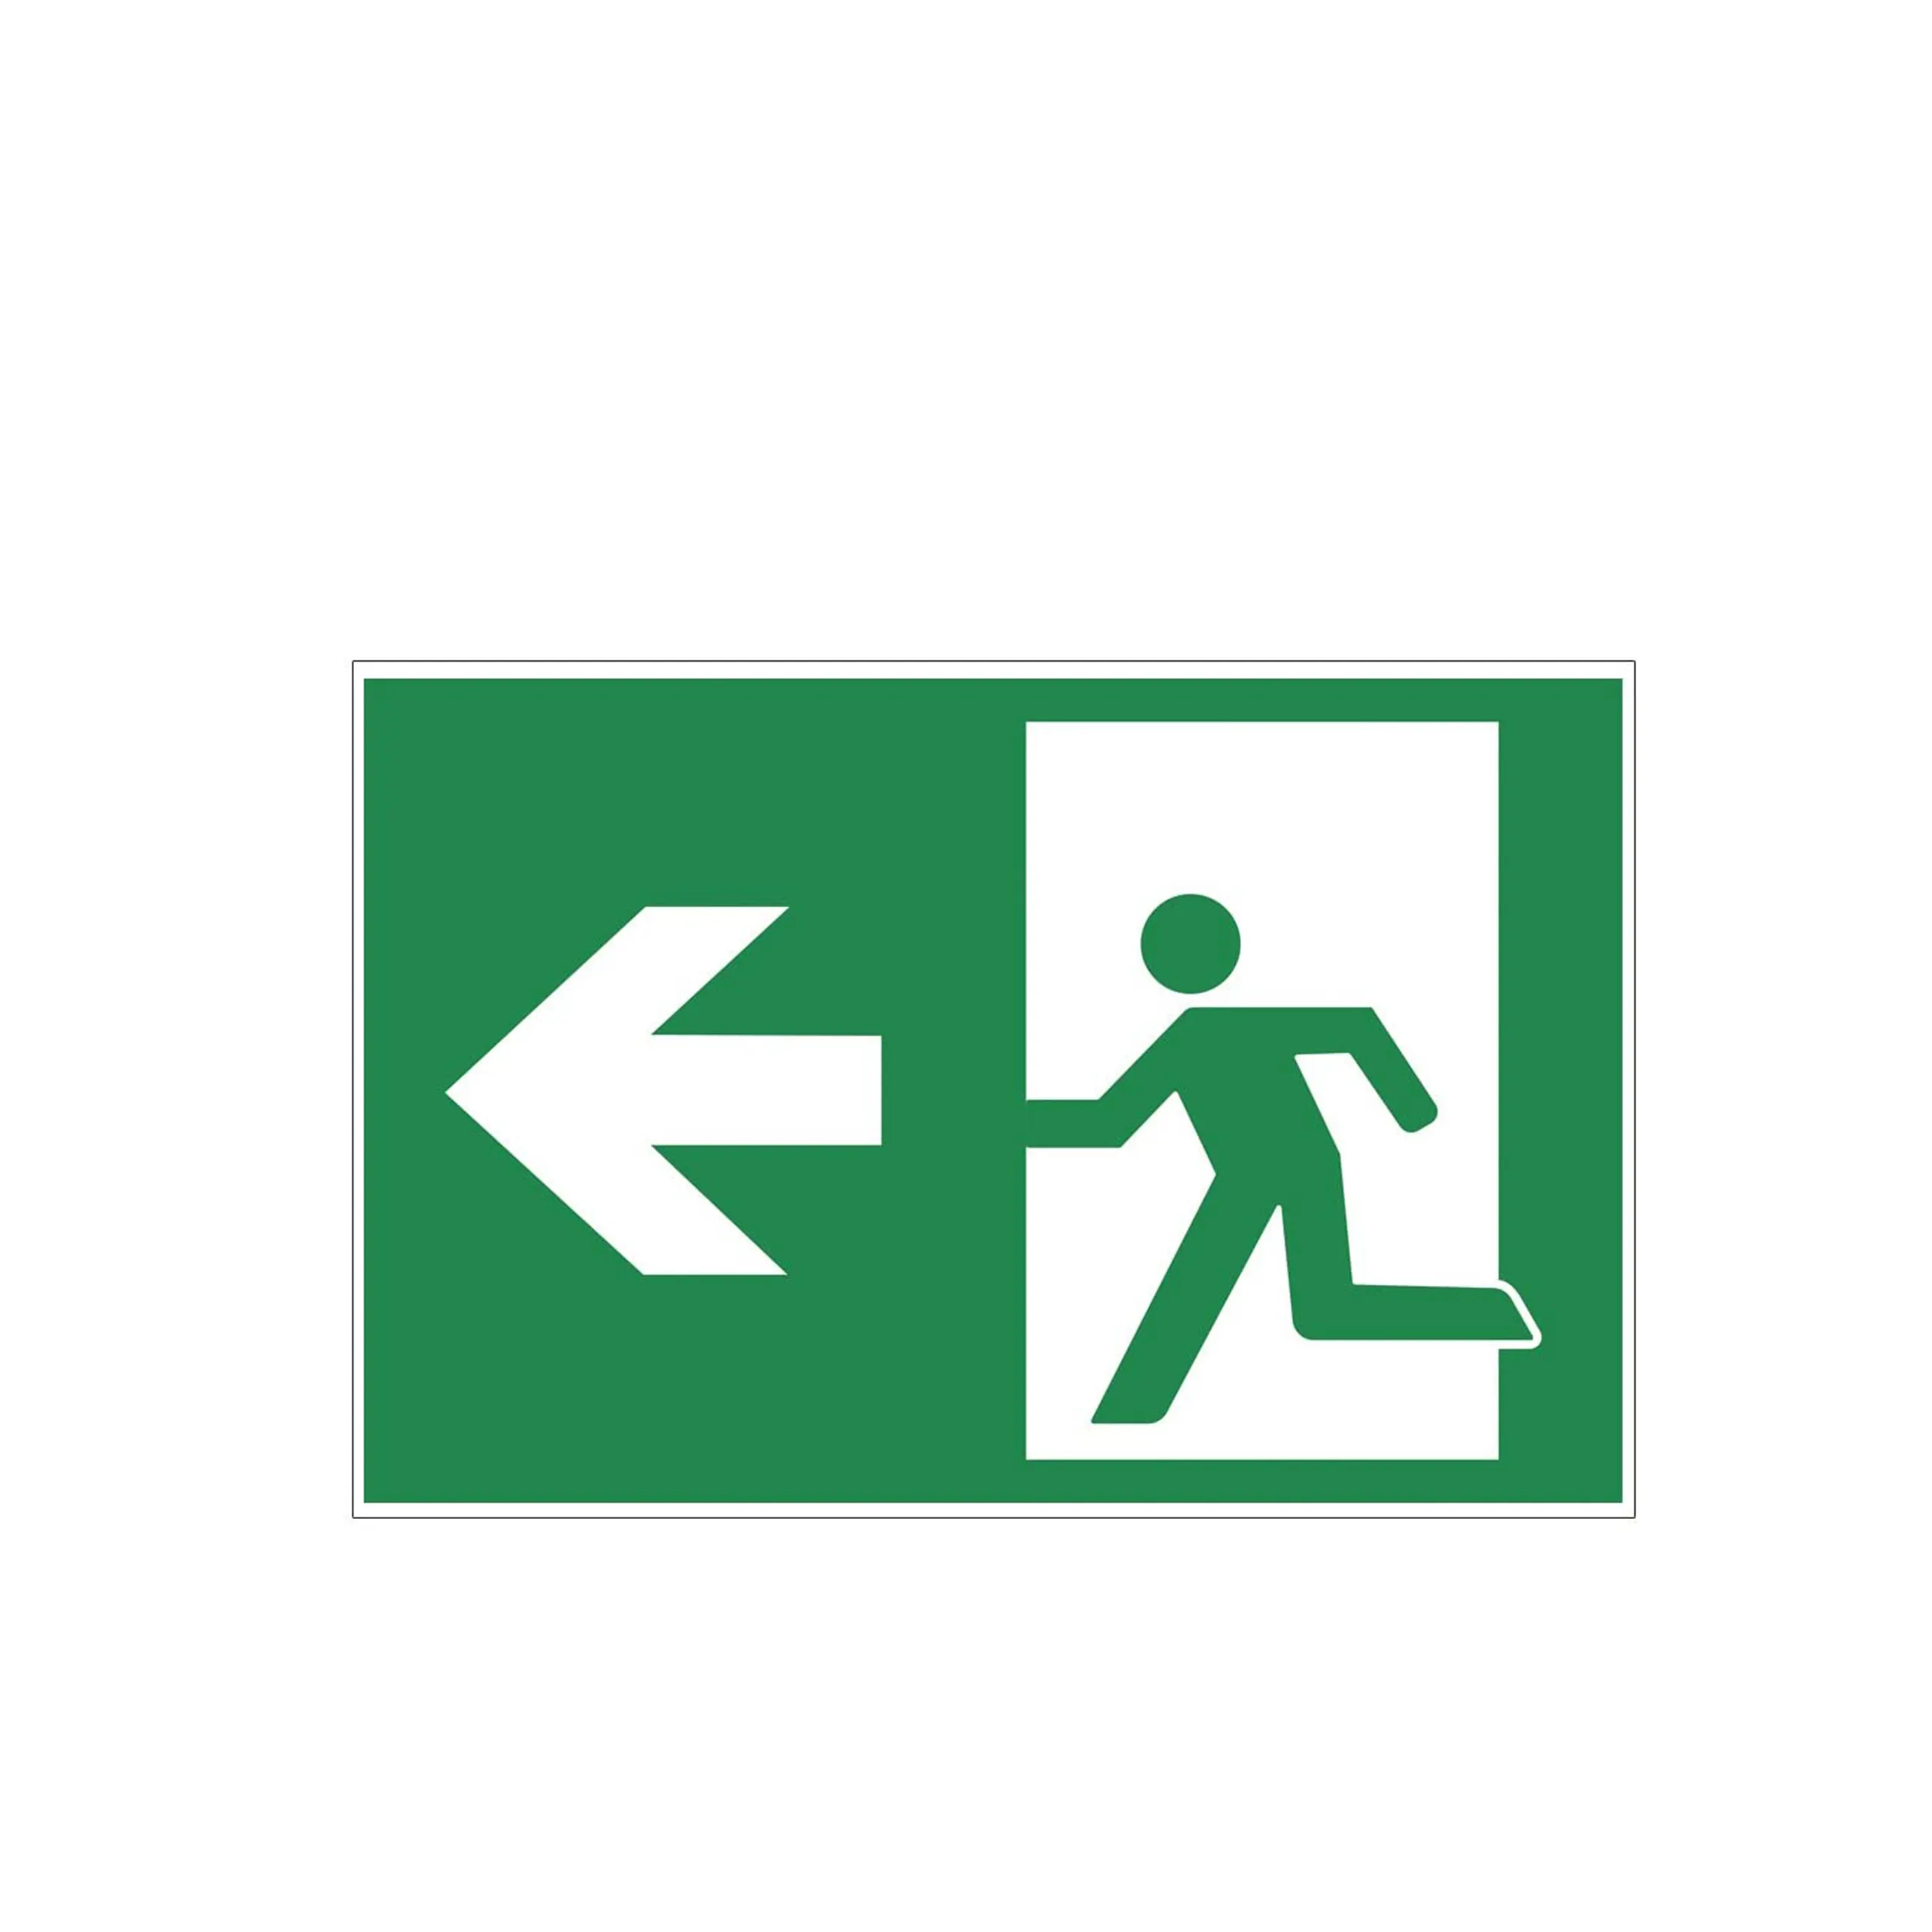 Emergency Exit Arrow Sign Sticker, Non-Toxic Tasteless Eco-Friendly Luminous Export Warning Signs